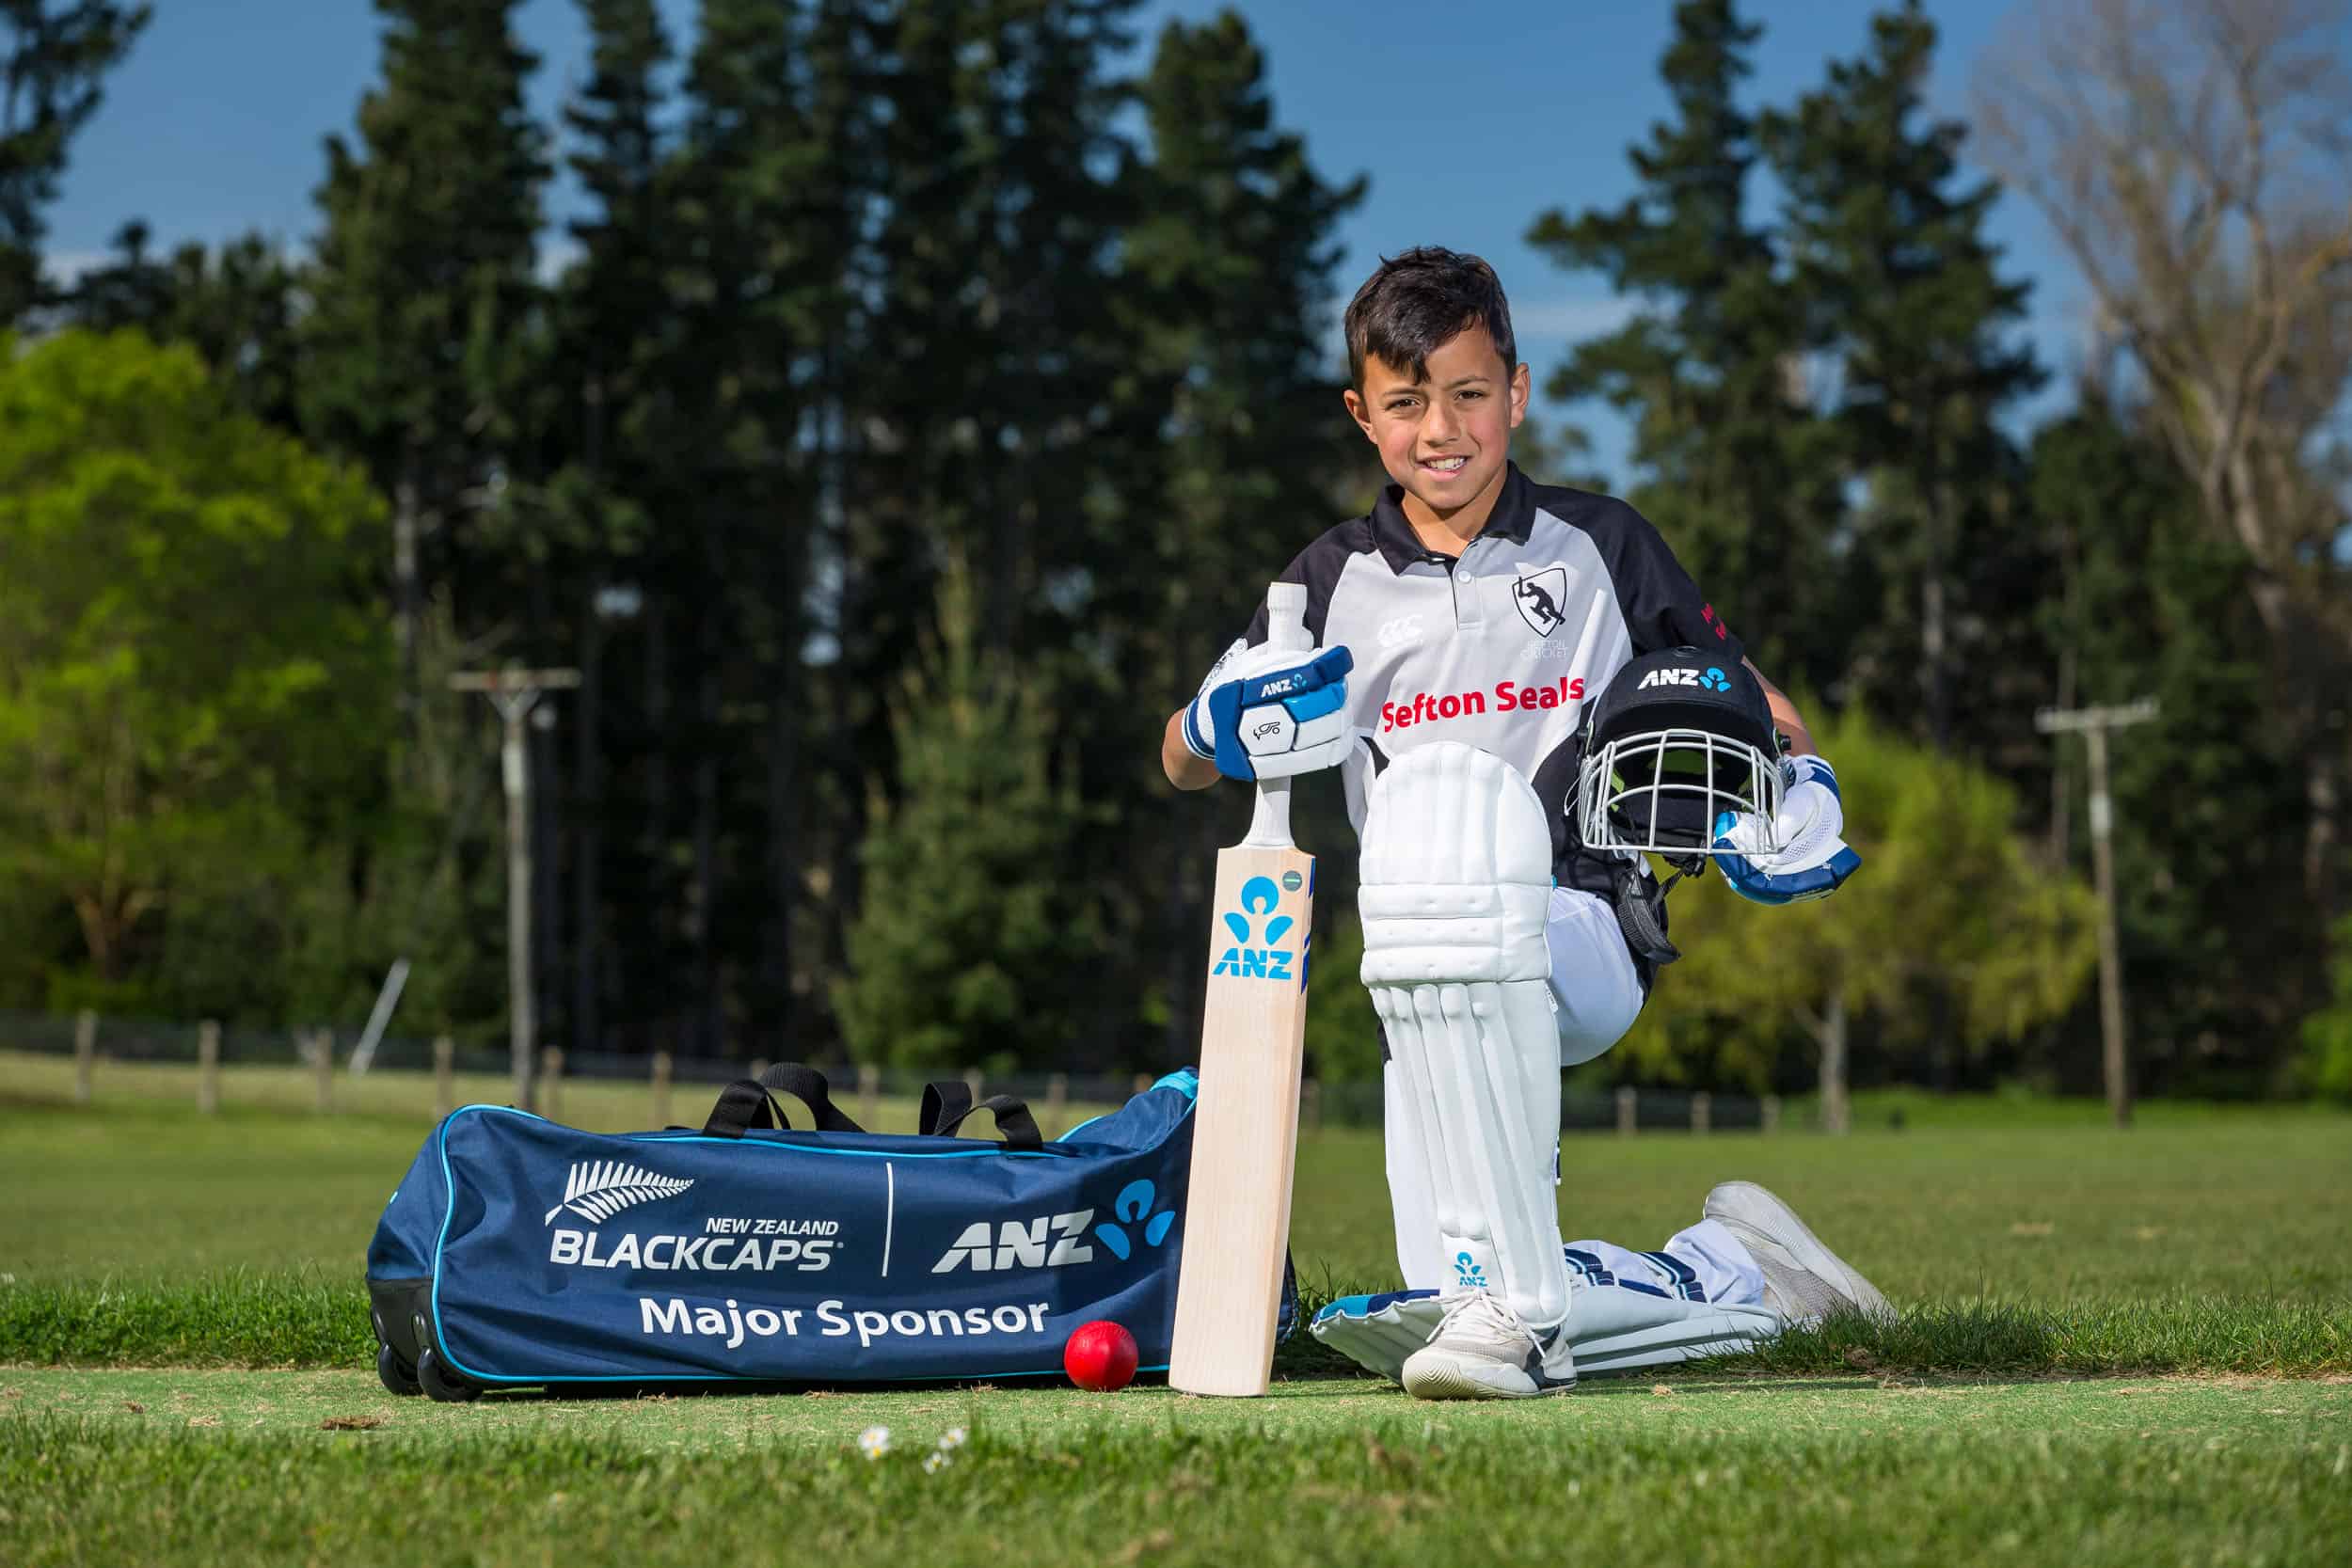 Young cricket player with ANZ sponsored sports equipment, Sefton.